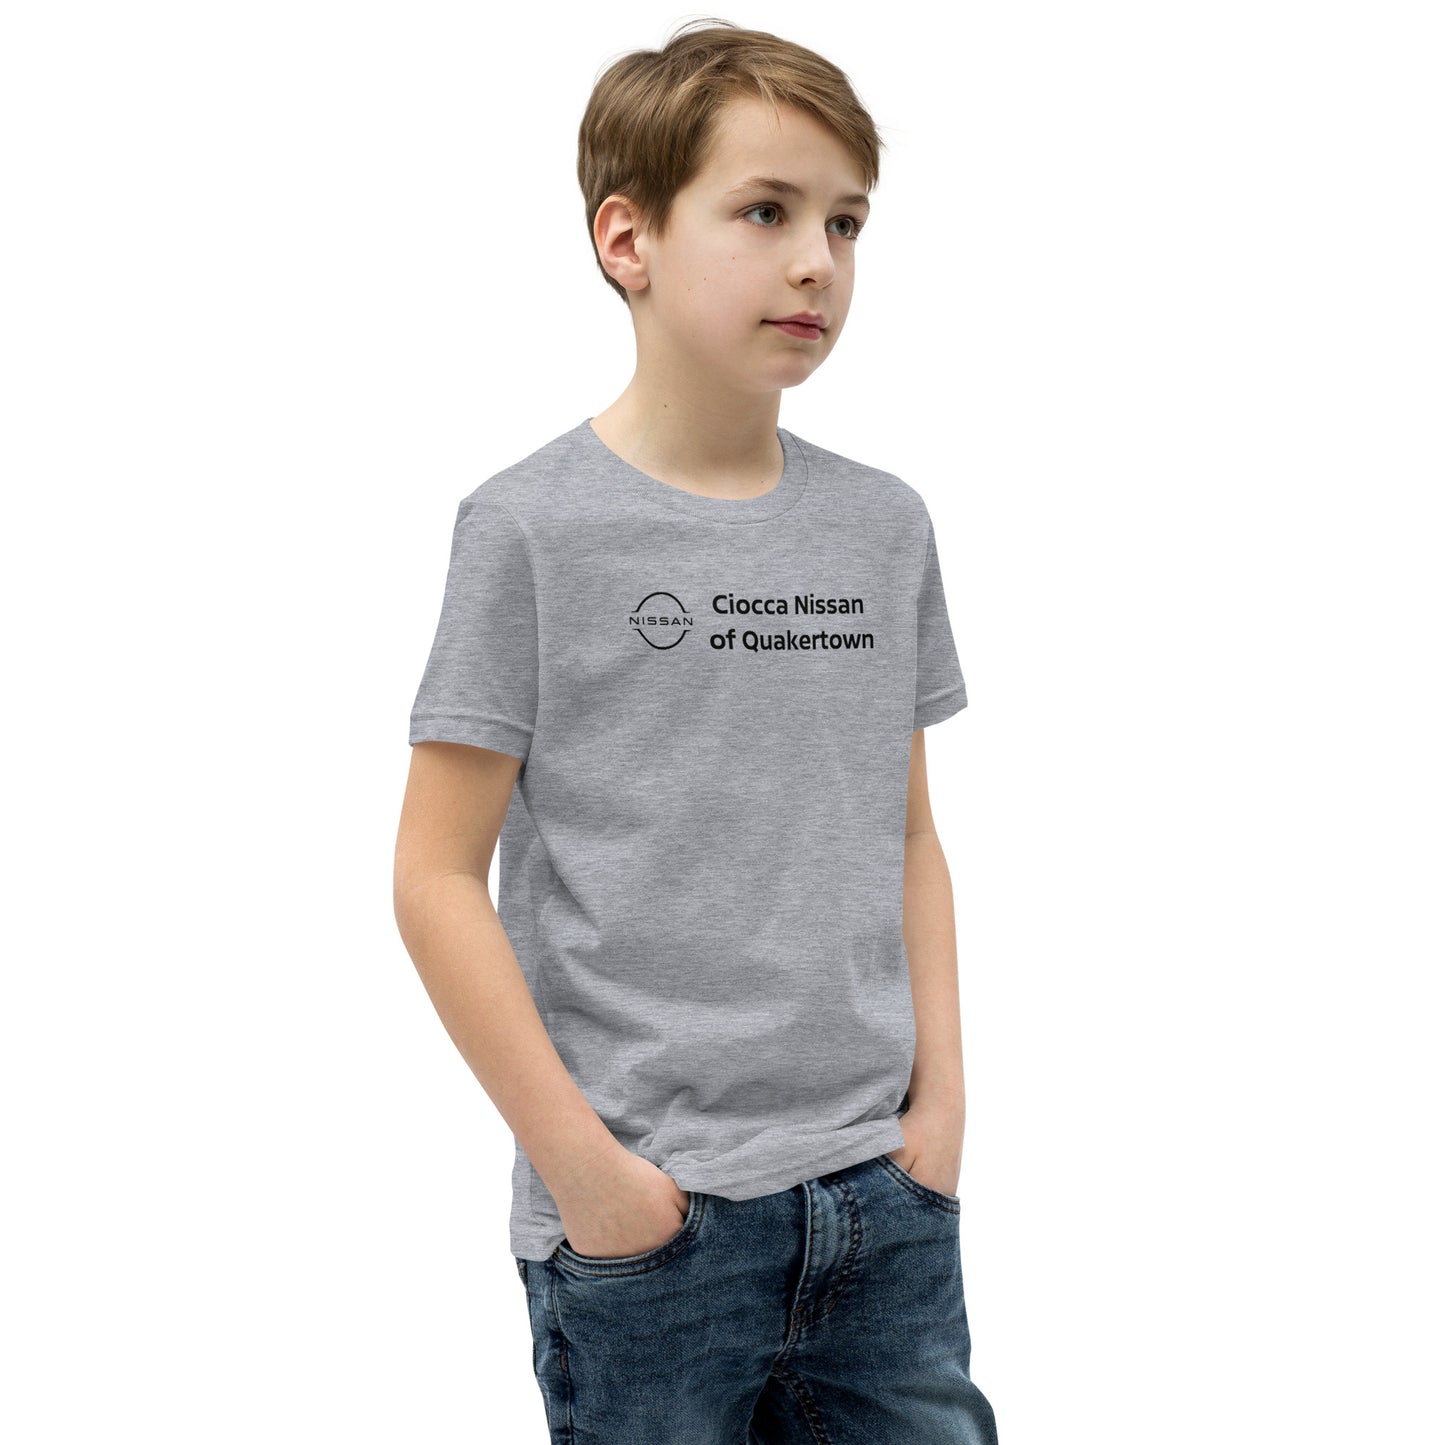 Youth Short Sleeve T-Shirt - Nissan of Quakertown